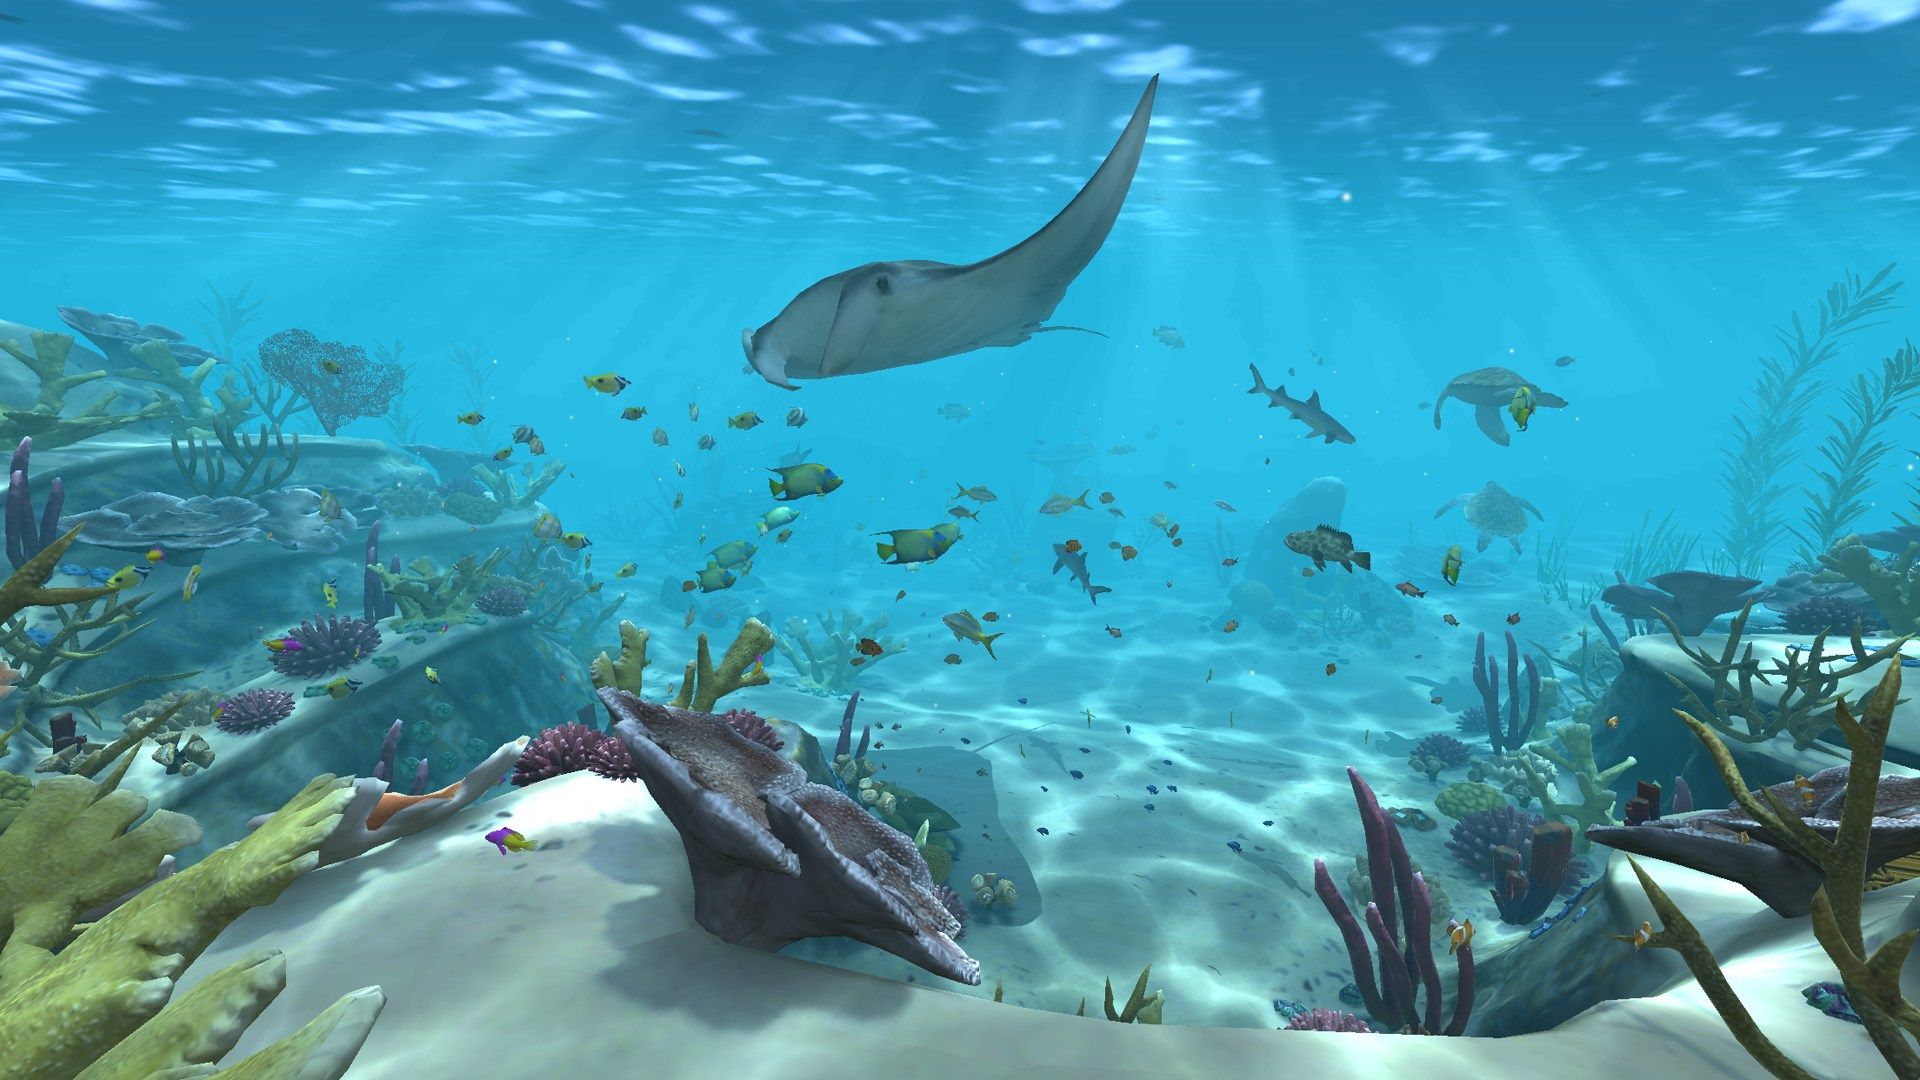 Awesome tropical reef, with Sharks, Manta Rays and Giant Turtles!